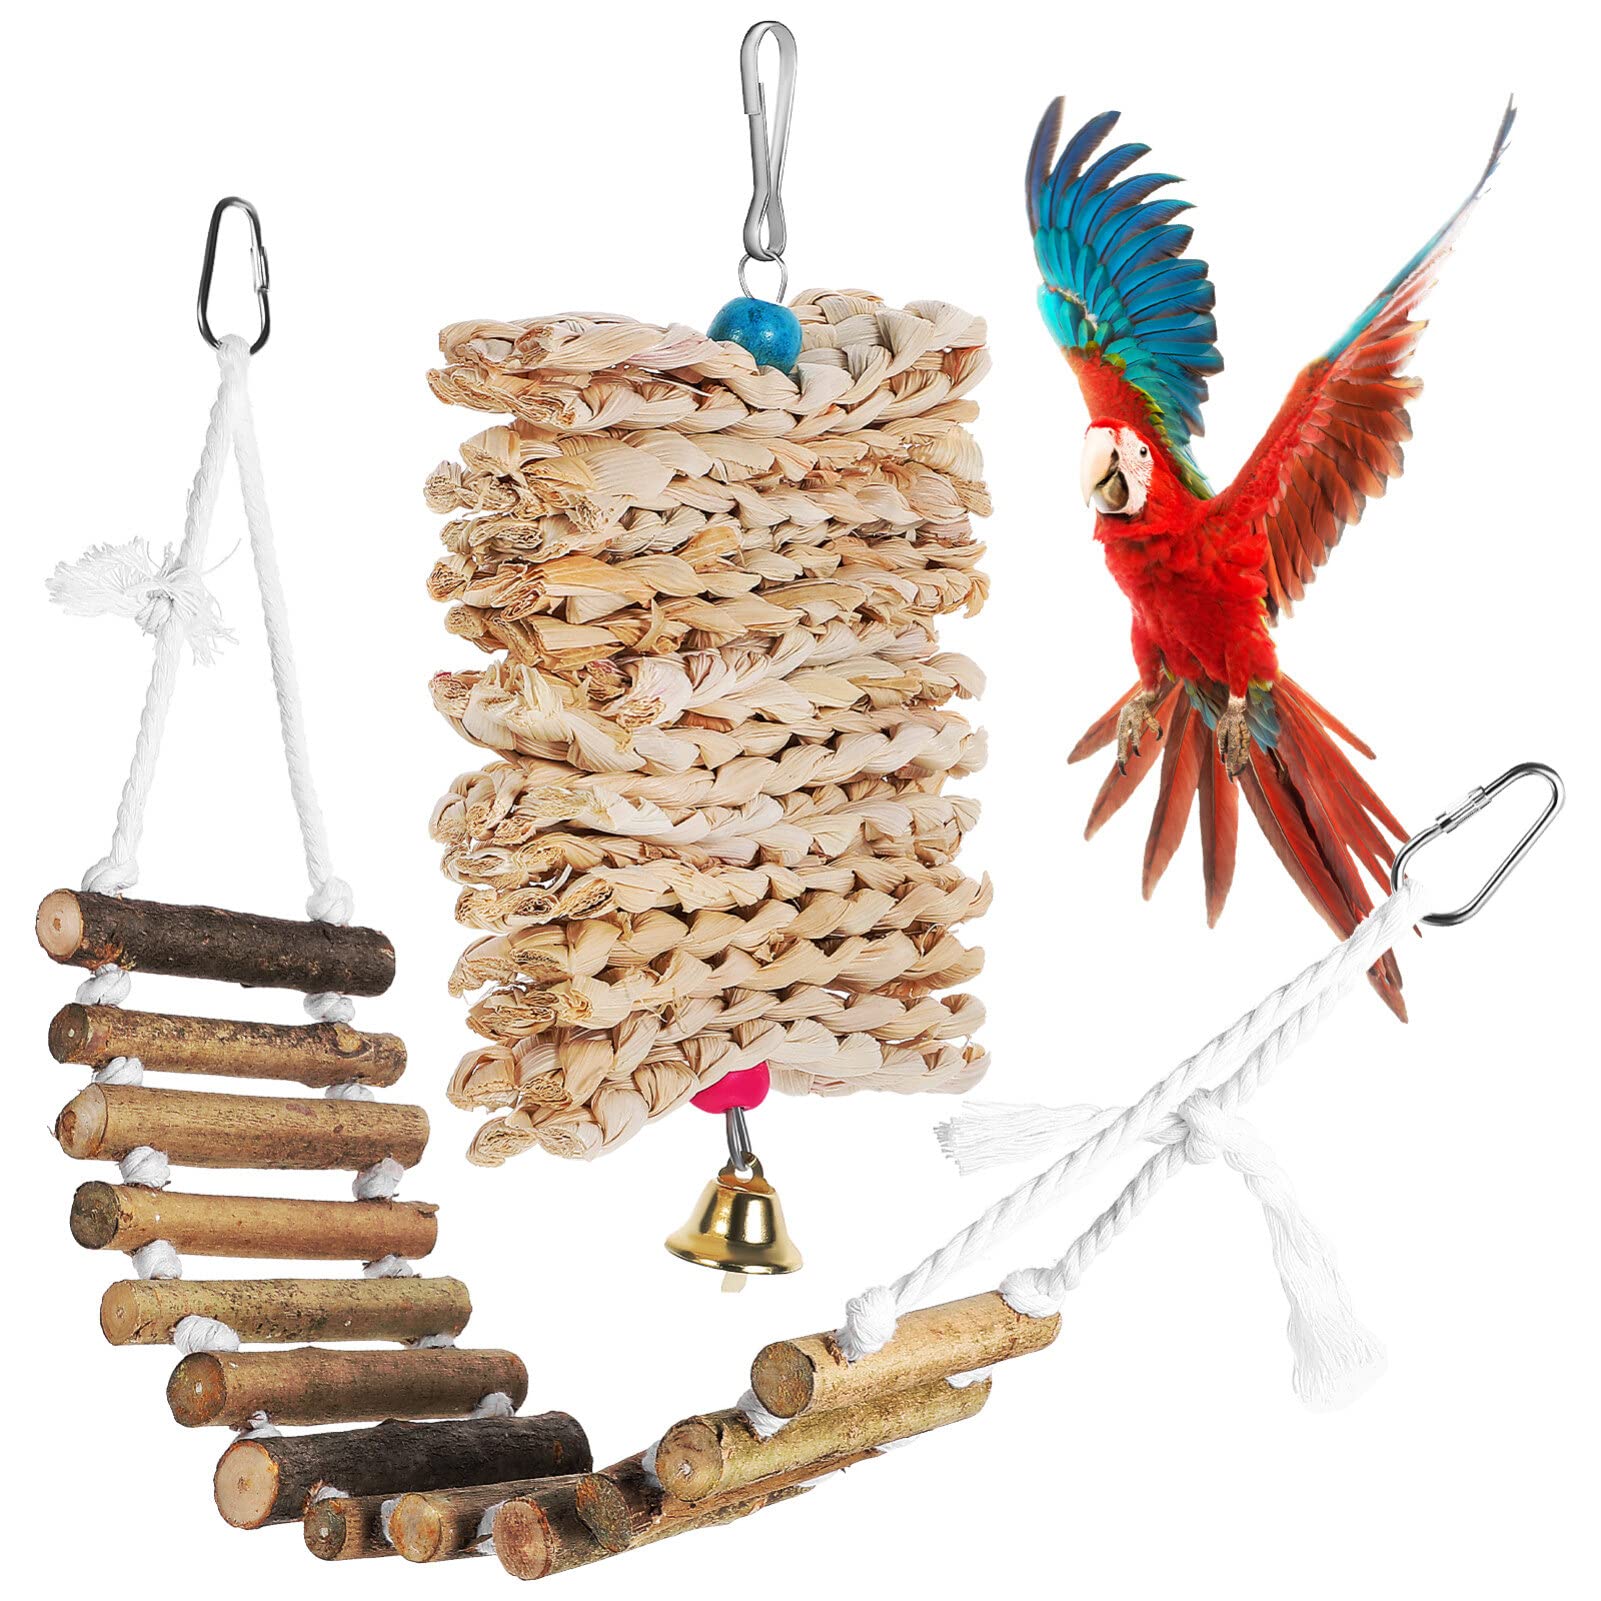 12 X POPETPOP BIRD PARROT TOYS, NATURAL WOOD LADDER SWING CHEWING TOYS SET HANGING SWING CLIMBING LADDERS TOYS FOR BIRD PARROT BUDGIES - TOTAL RRP £96: LOCATION - RACK B